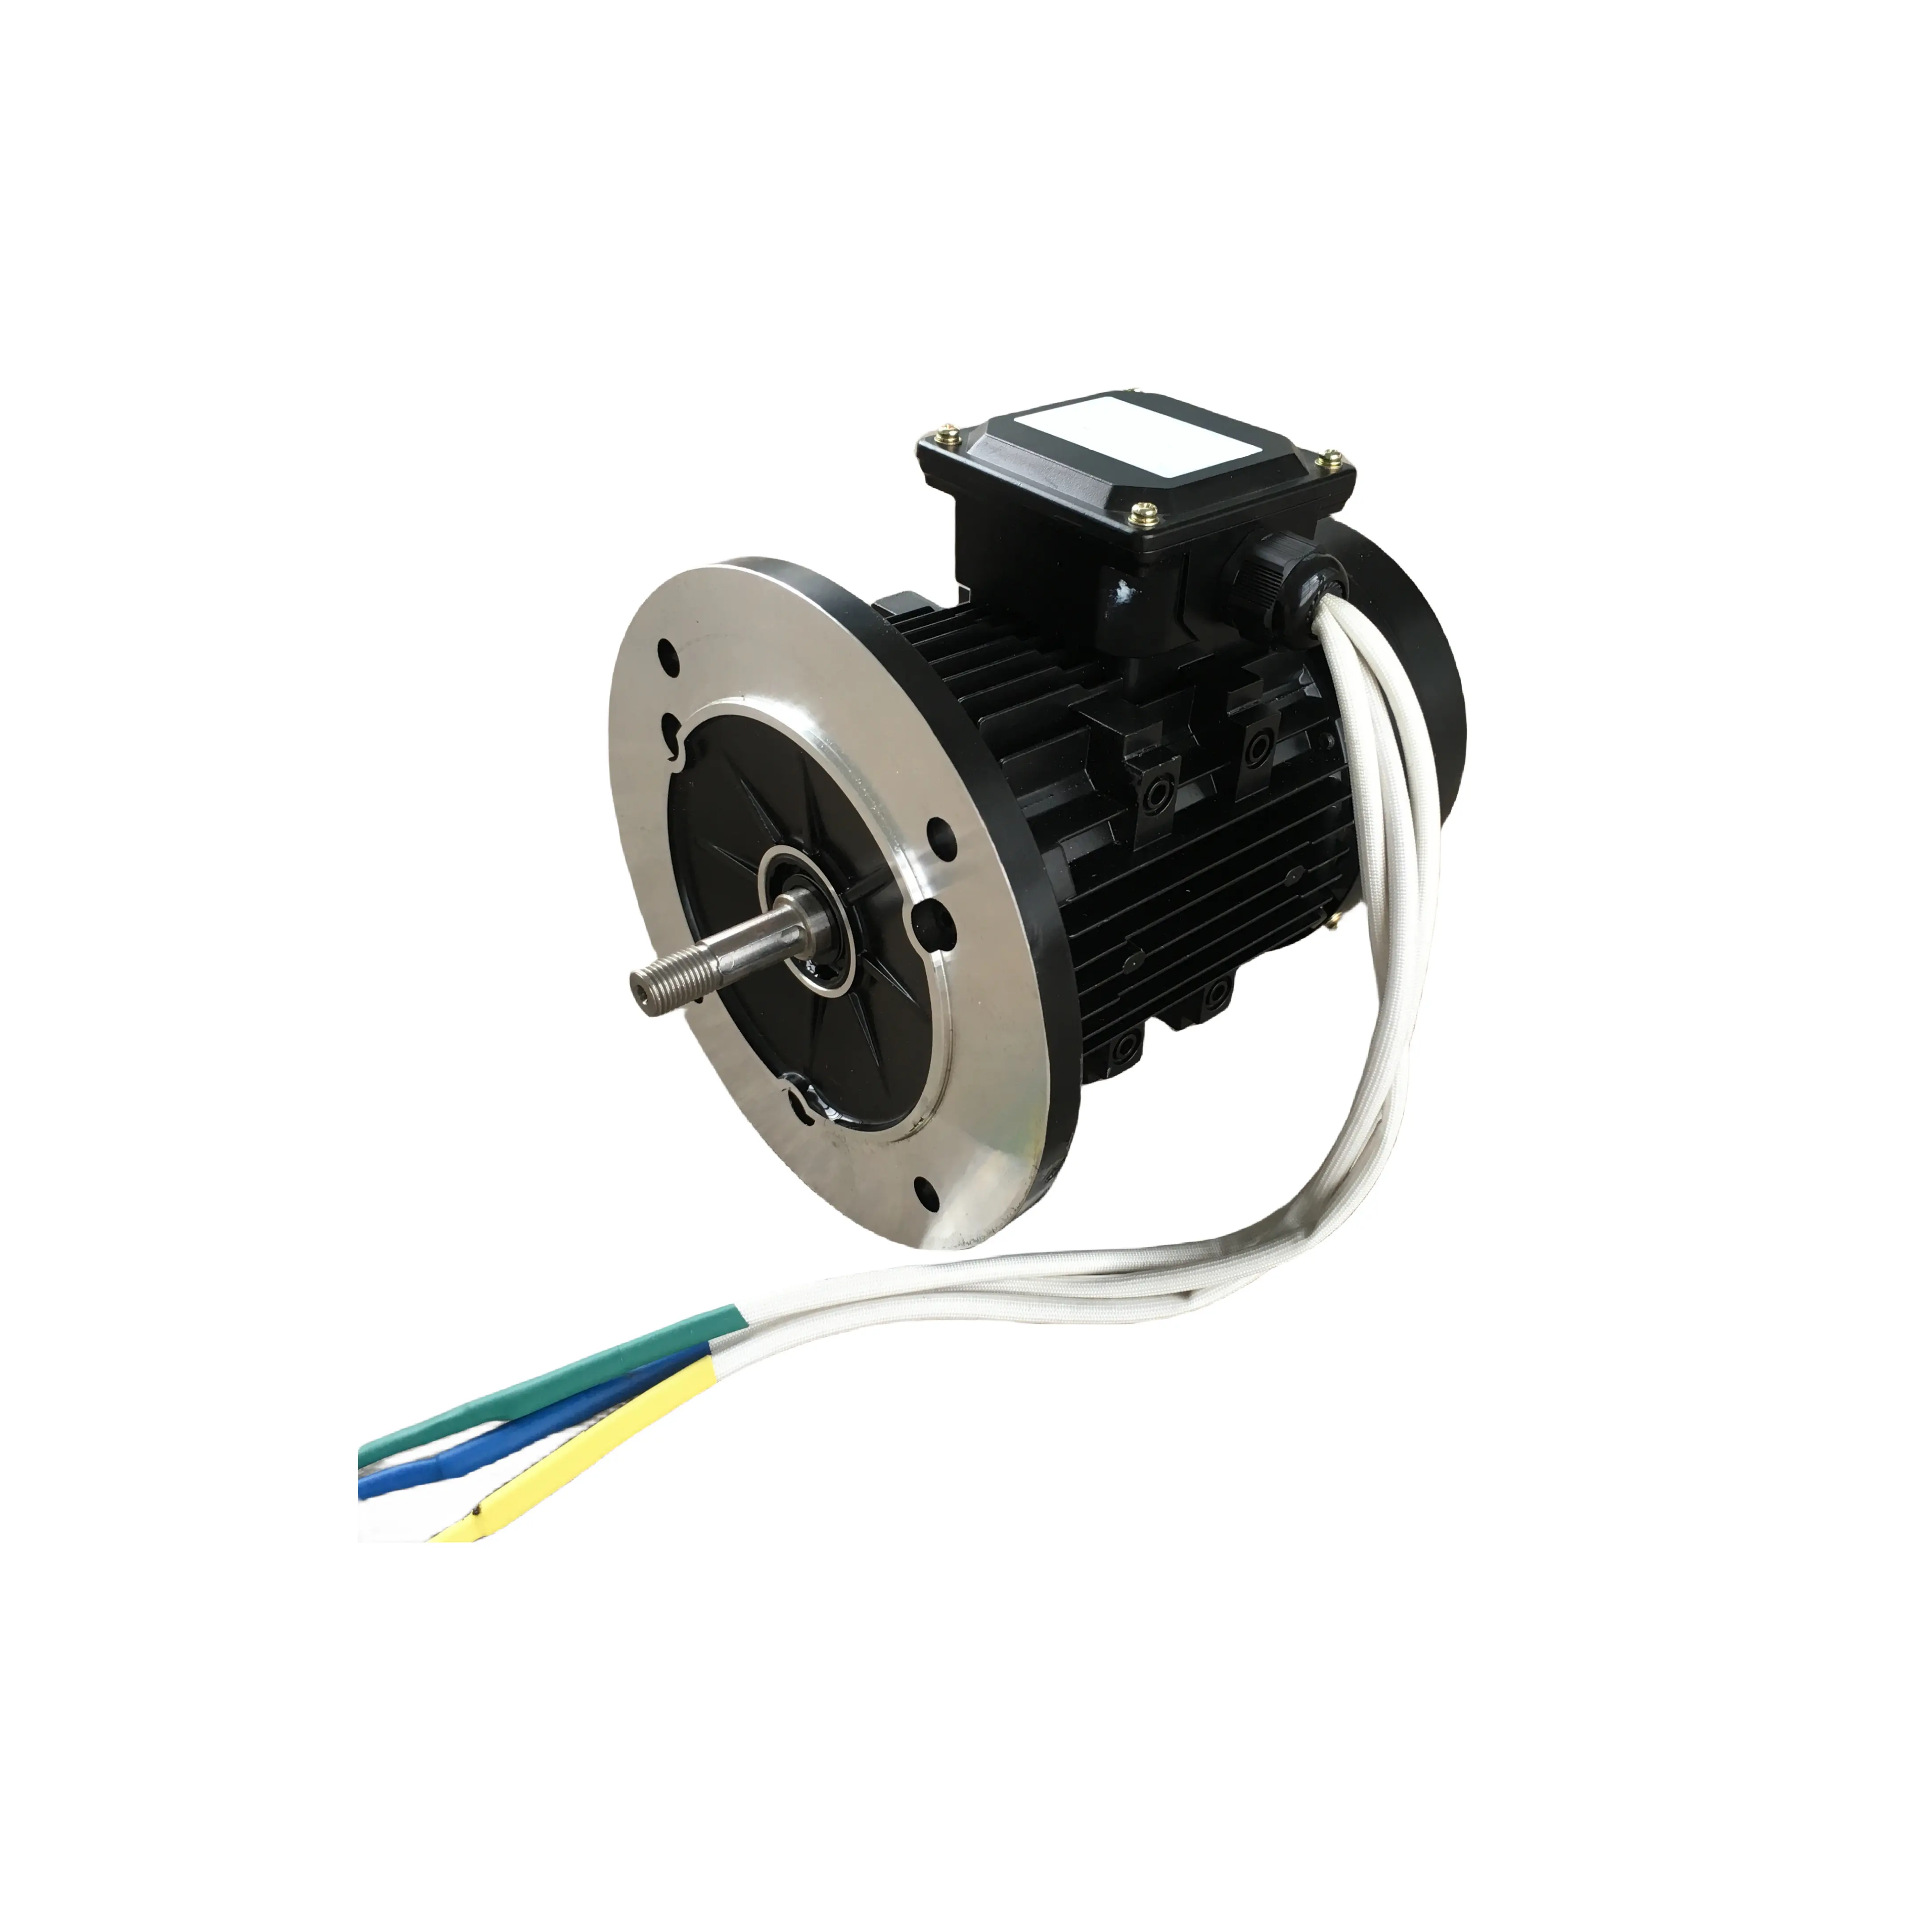 BLDC Motor 72V 9.0KW 1500RPM Brushless DC Motor for Industrial DC Traction Drive Control